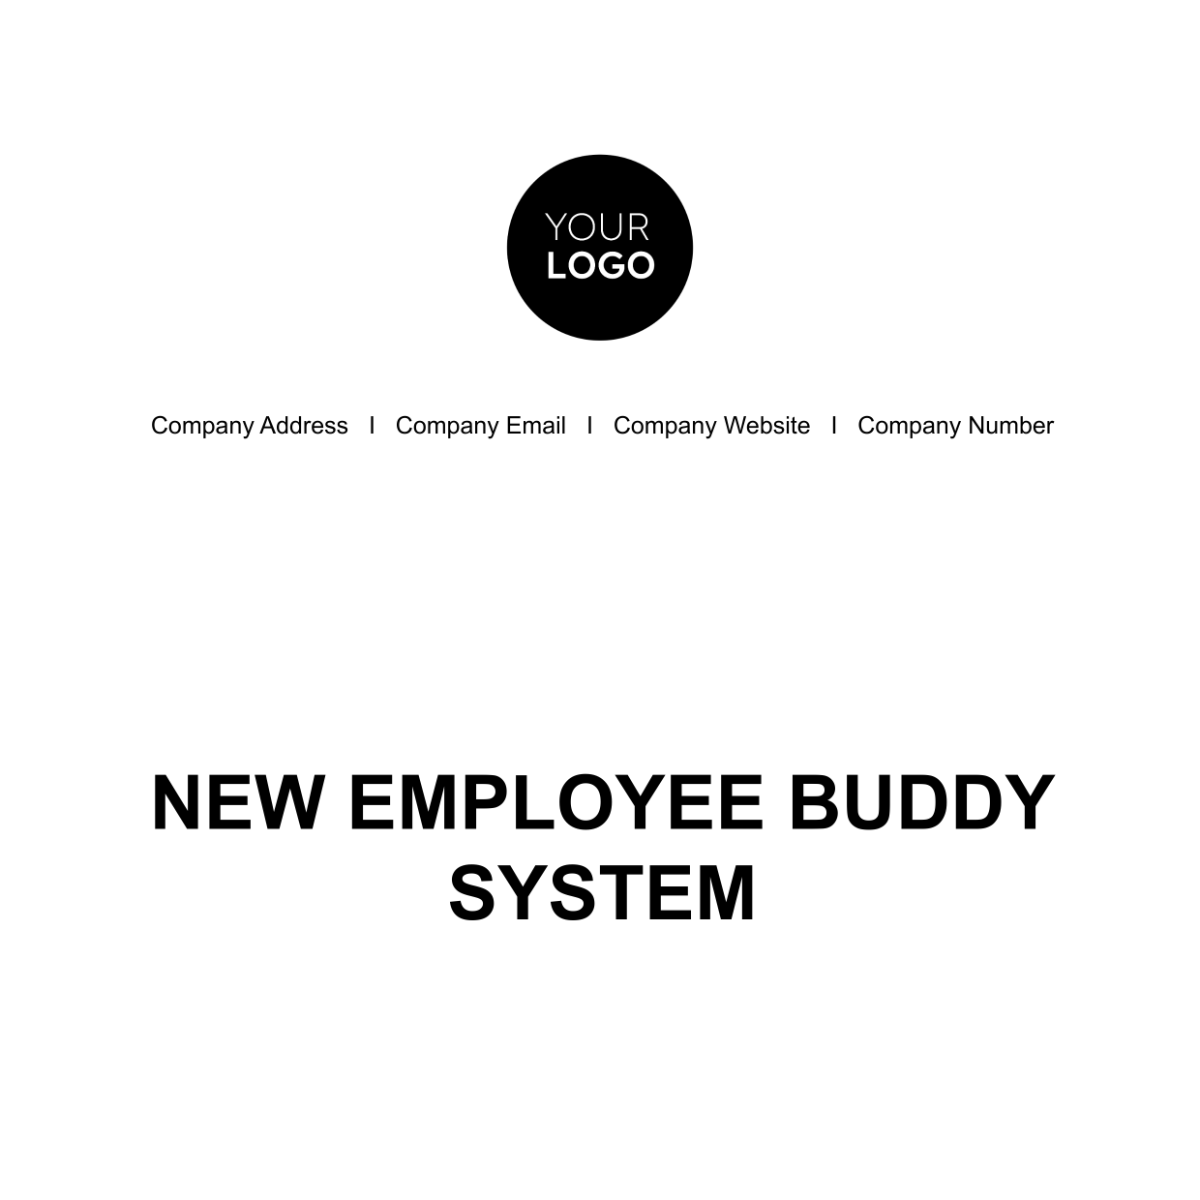 New Employee Buddy System Guide HR Template